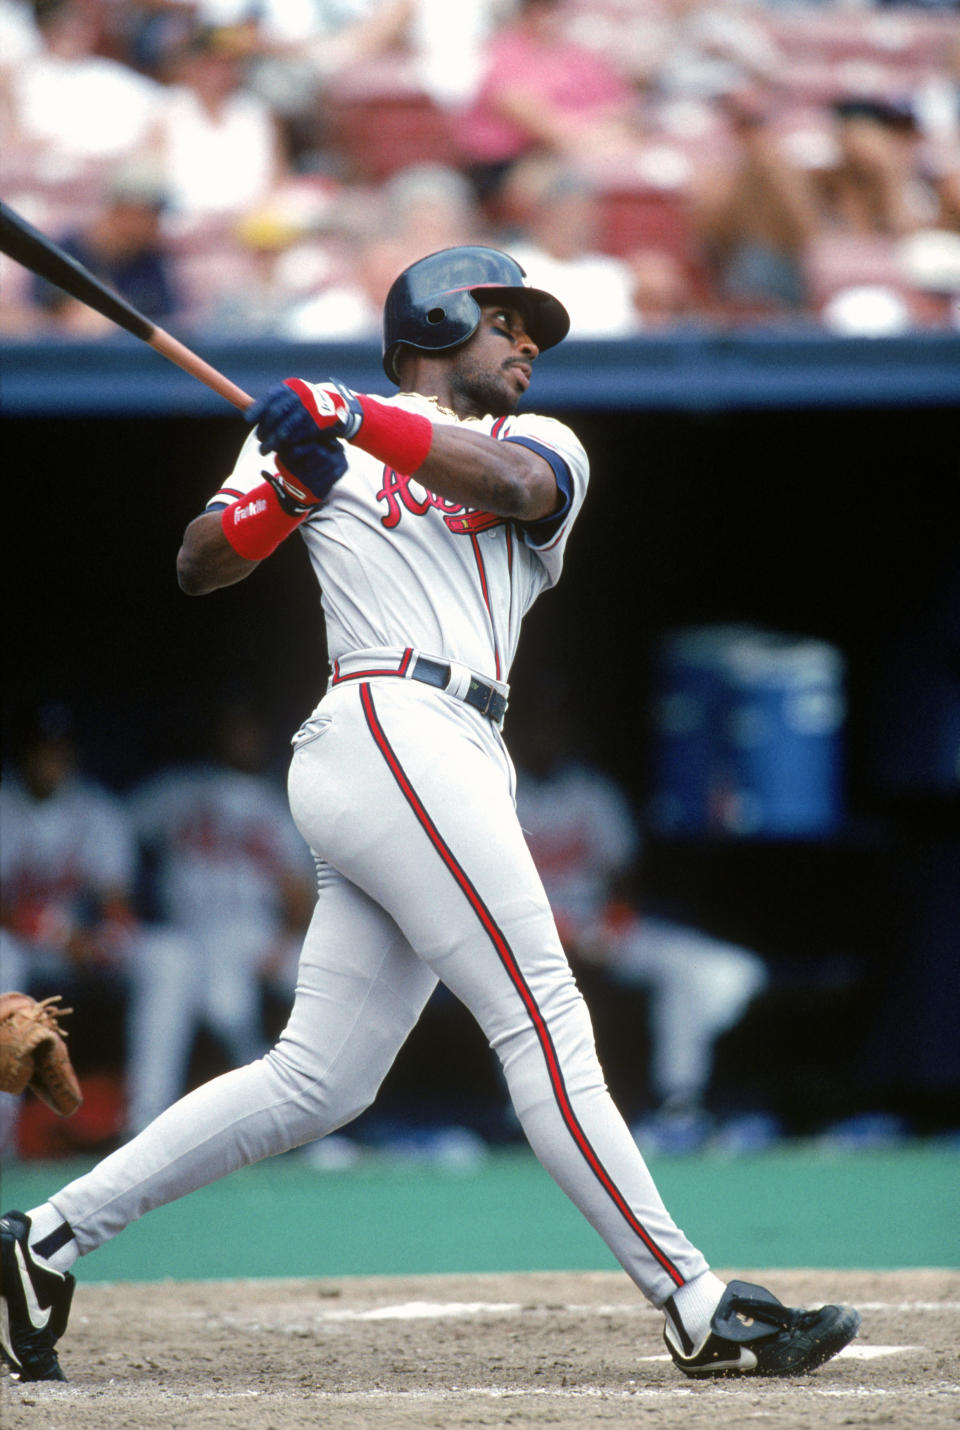 <b>Fred McGriff</b><br> <br>A player with a memorable, even unique swing. Skinny as a rail. Great eye at the plate. McGriff was one of those young guys the Yankees let get away before the front office reform of the 1990s. He was part of the trade that helped the Blue Jays win two World Series (though McGriff was one of the guys traded). Many of his numbers are impressive, especially 493 homers. He’s just not quite Cooperstown. – DB<br> <br><i>BLS vote: No<br> Will he get in this year: No<br> BBTF projection: 15.7 percent</i><br> <br>(MLB Photos via Getty Images)